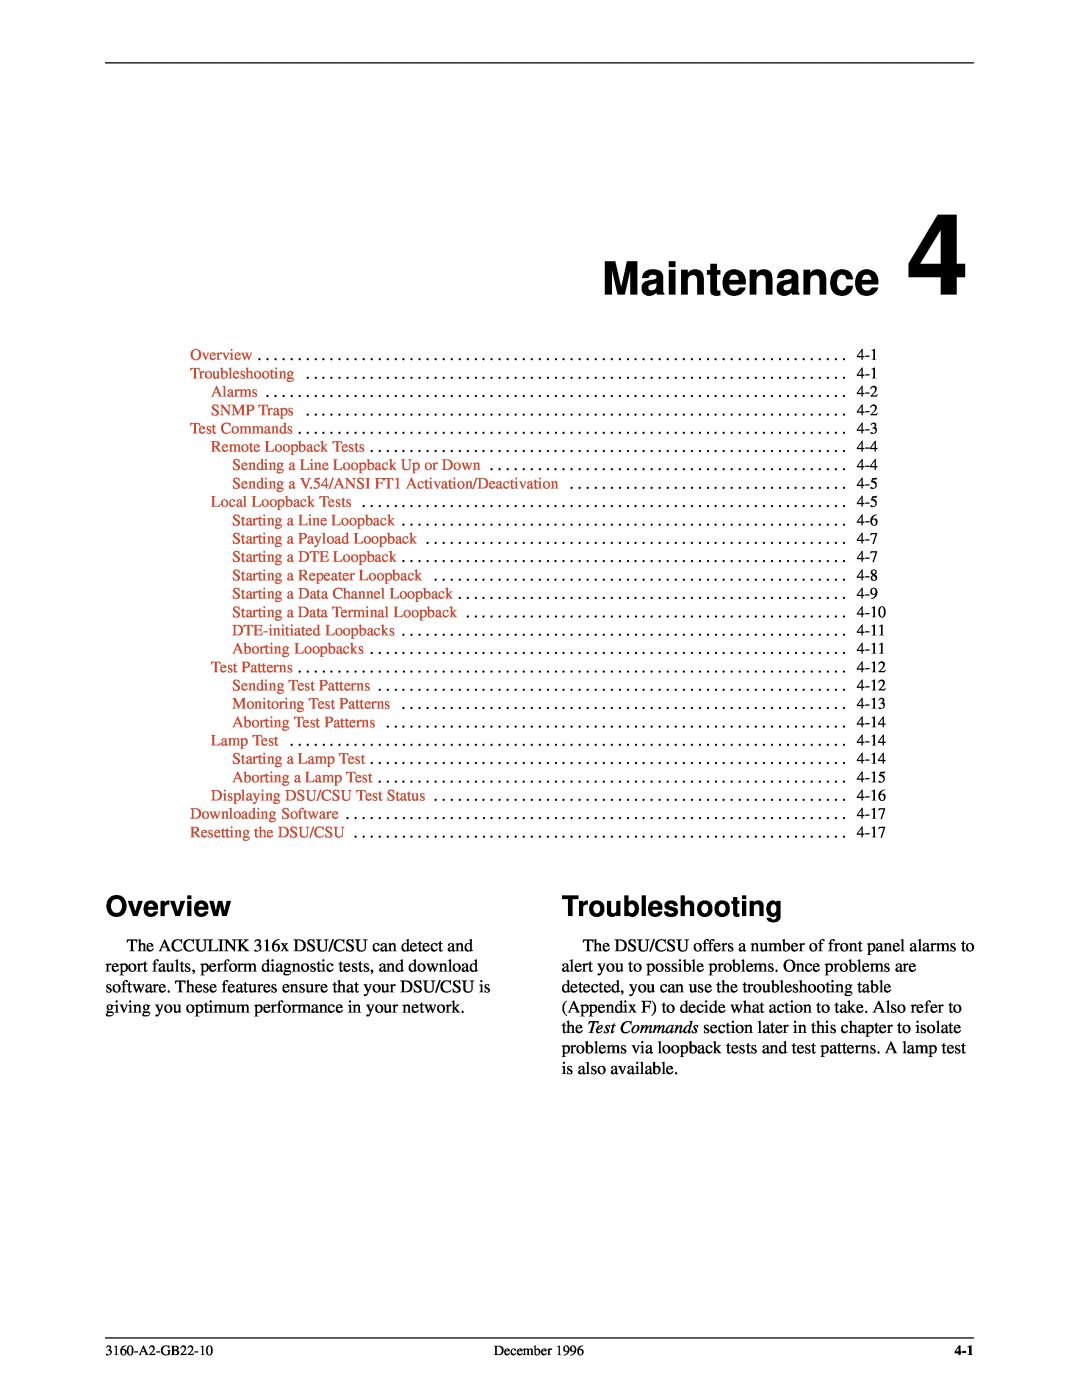 Paradyne 316x manual Maintenance, Troubleshooting, Overview 